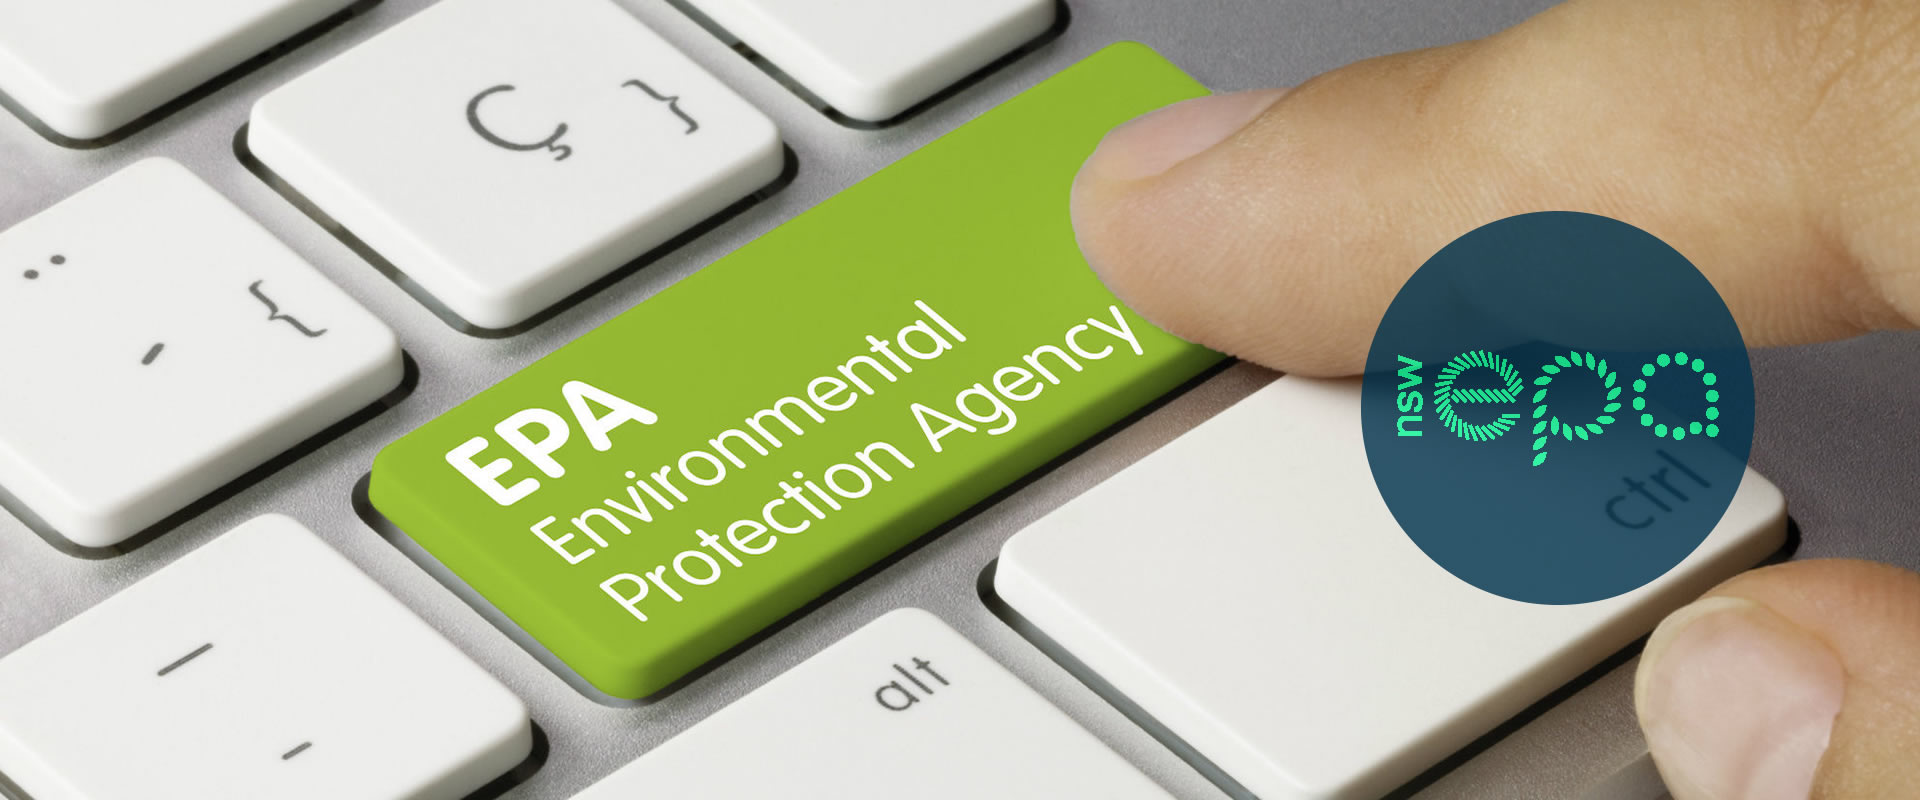 EPA paving the way for industry pollution